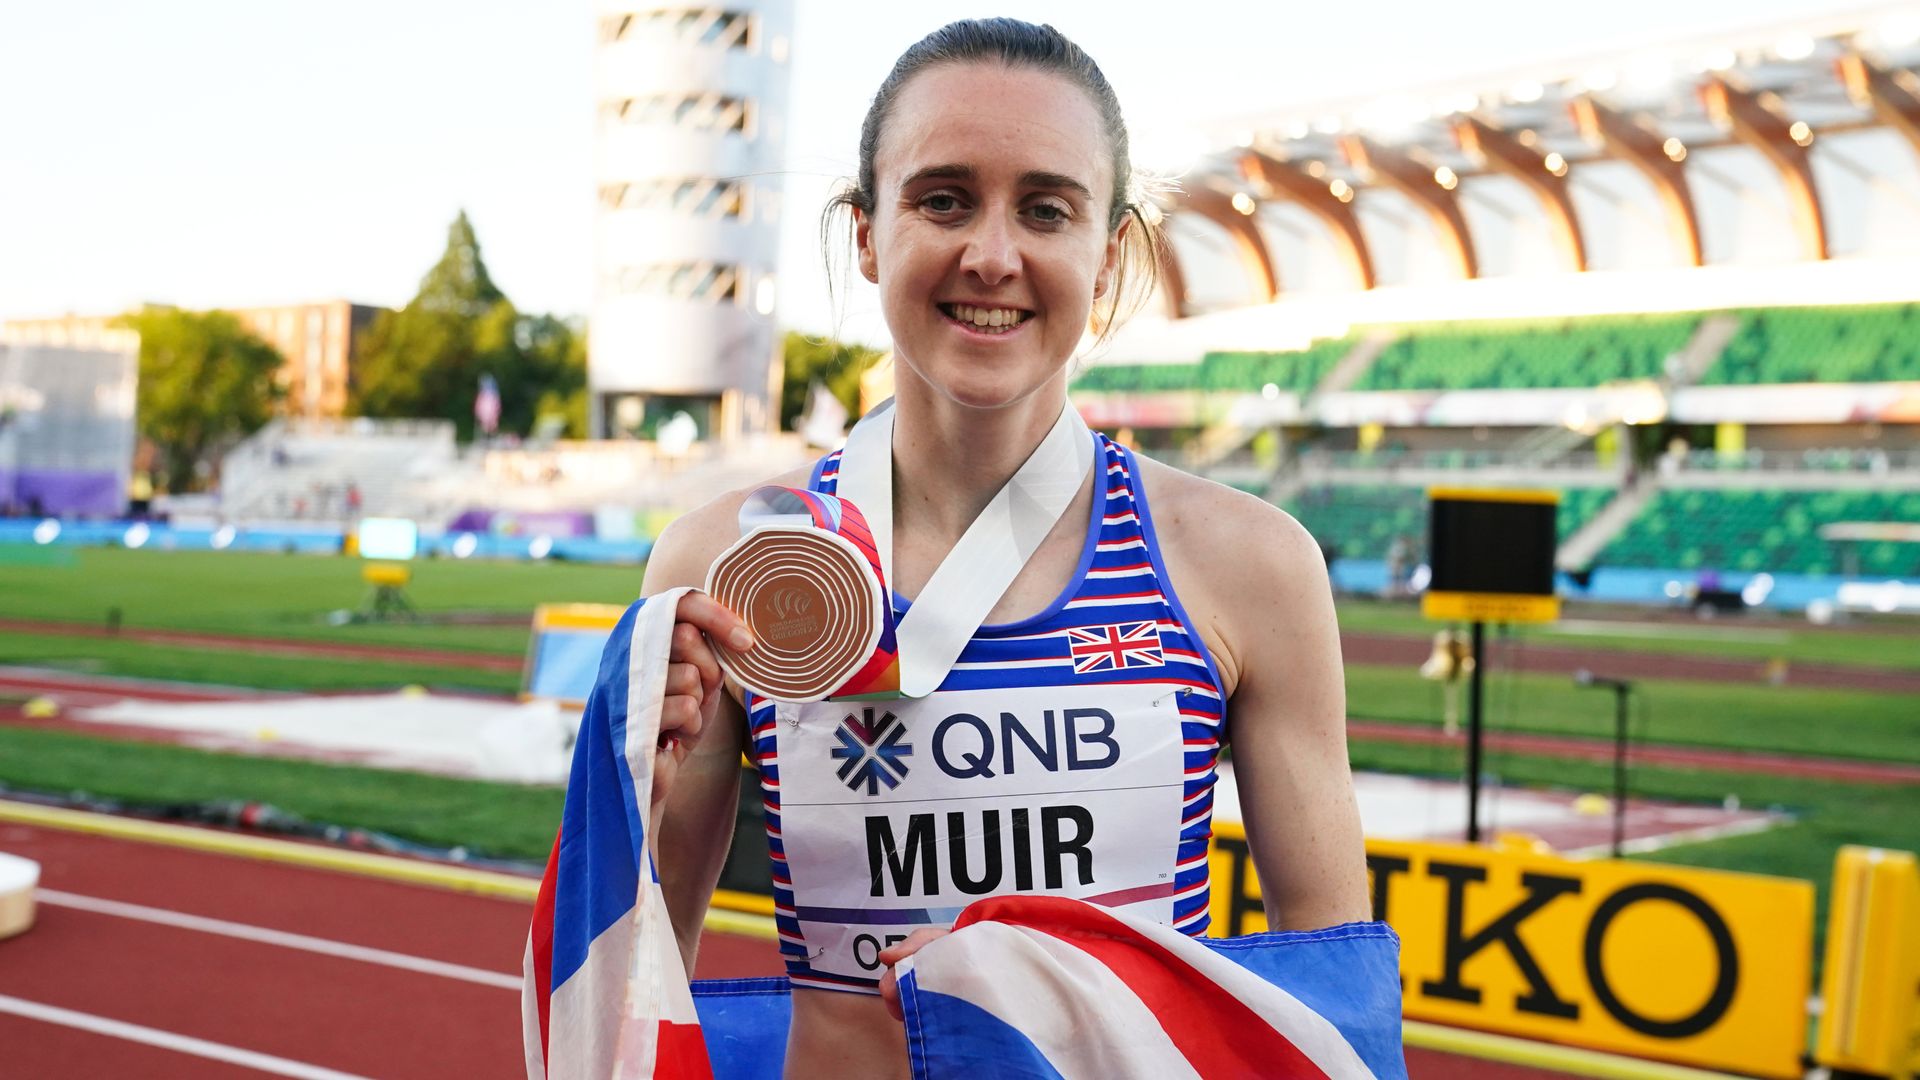 Muir claims 1500m bronze at World Champs | KJT loses heptathlon crown